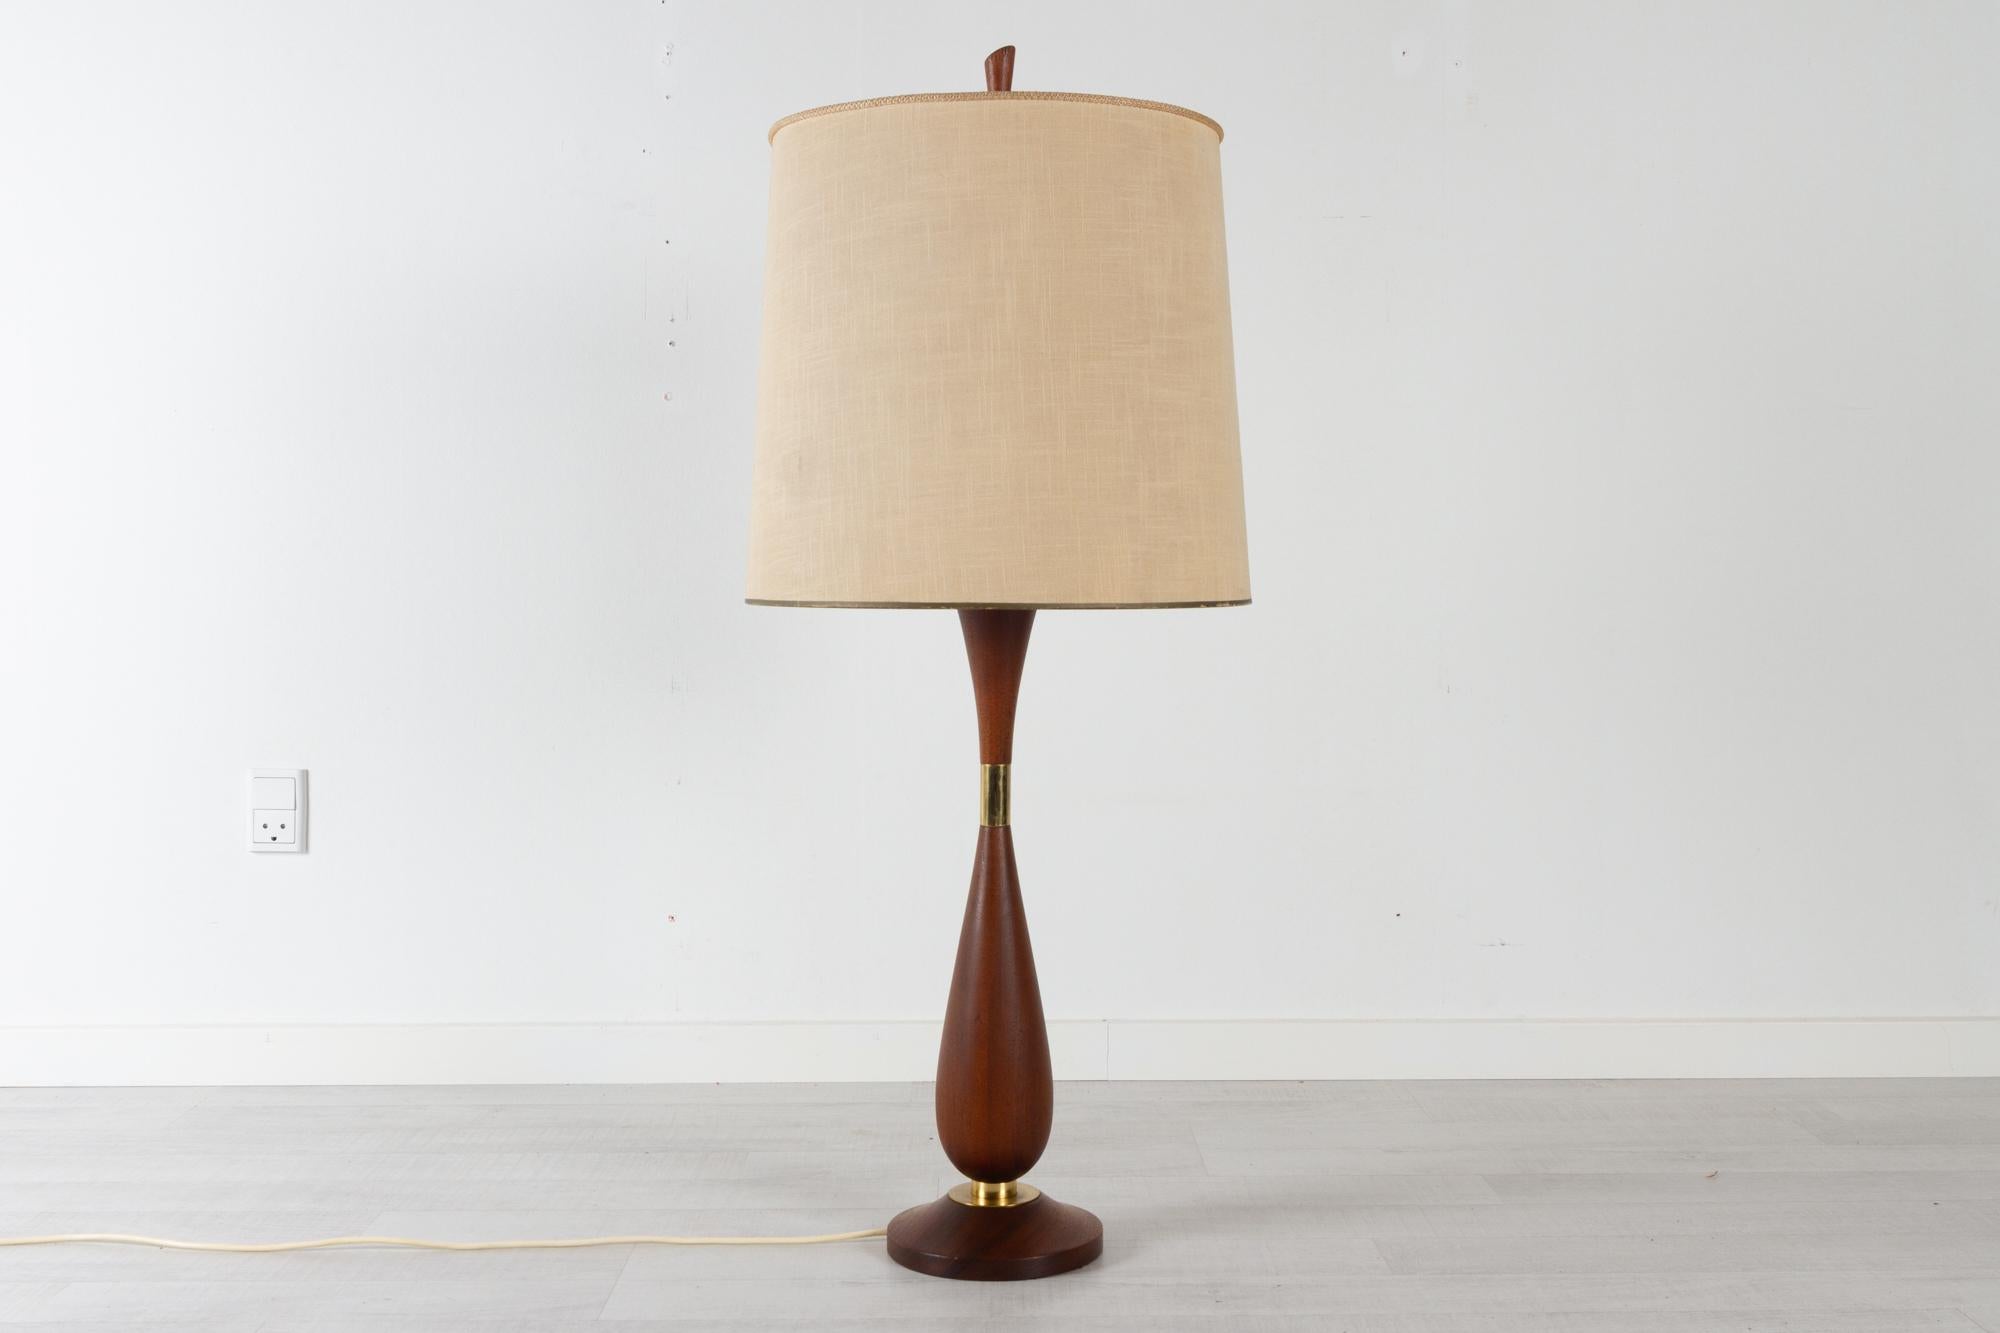 Large Vintage Danish teak table lamp 1950s
Danish mid-century modern organic table lamp in teak and brass with original lamp shade. Socket housing in brass. 
Lamp body and foot in solid teak with natural patina.
Also usable as a floor lamp with a